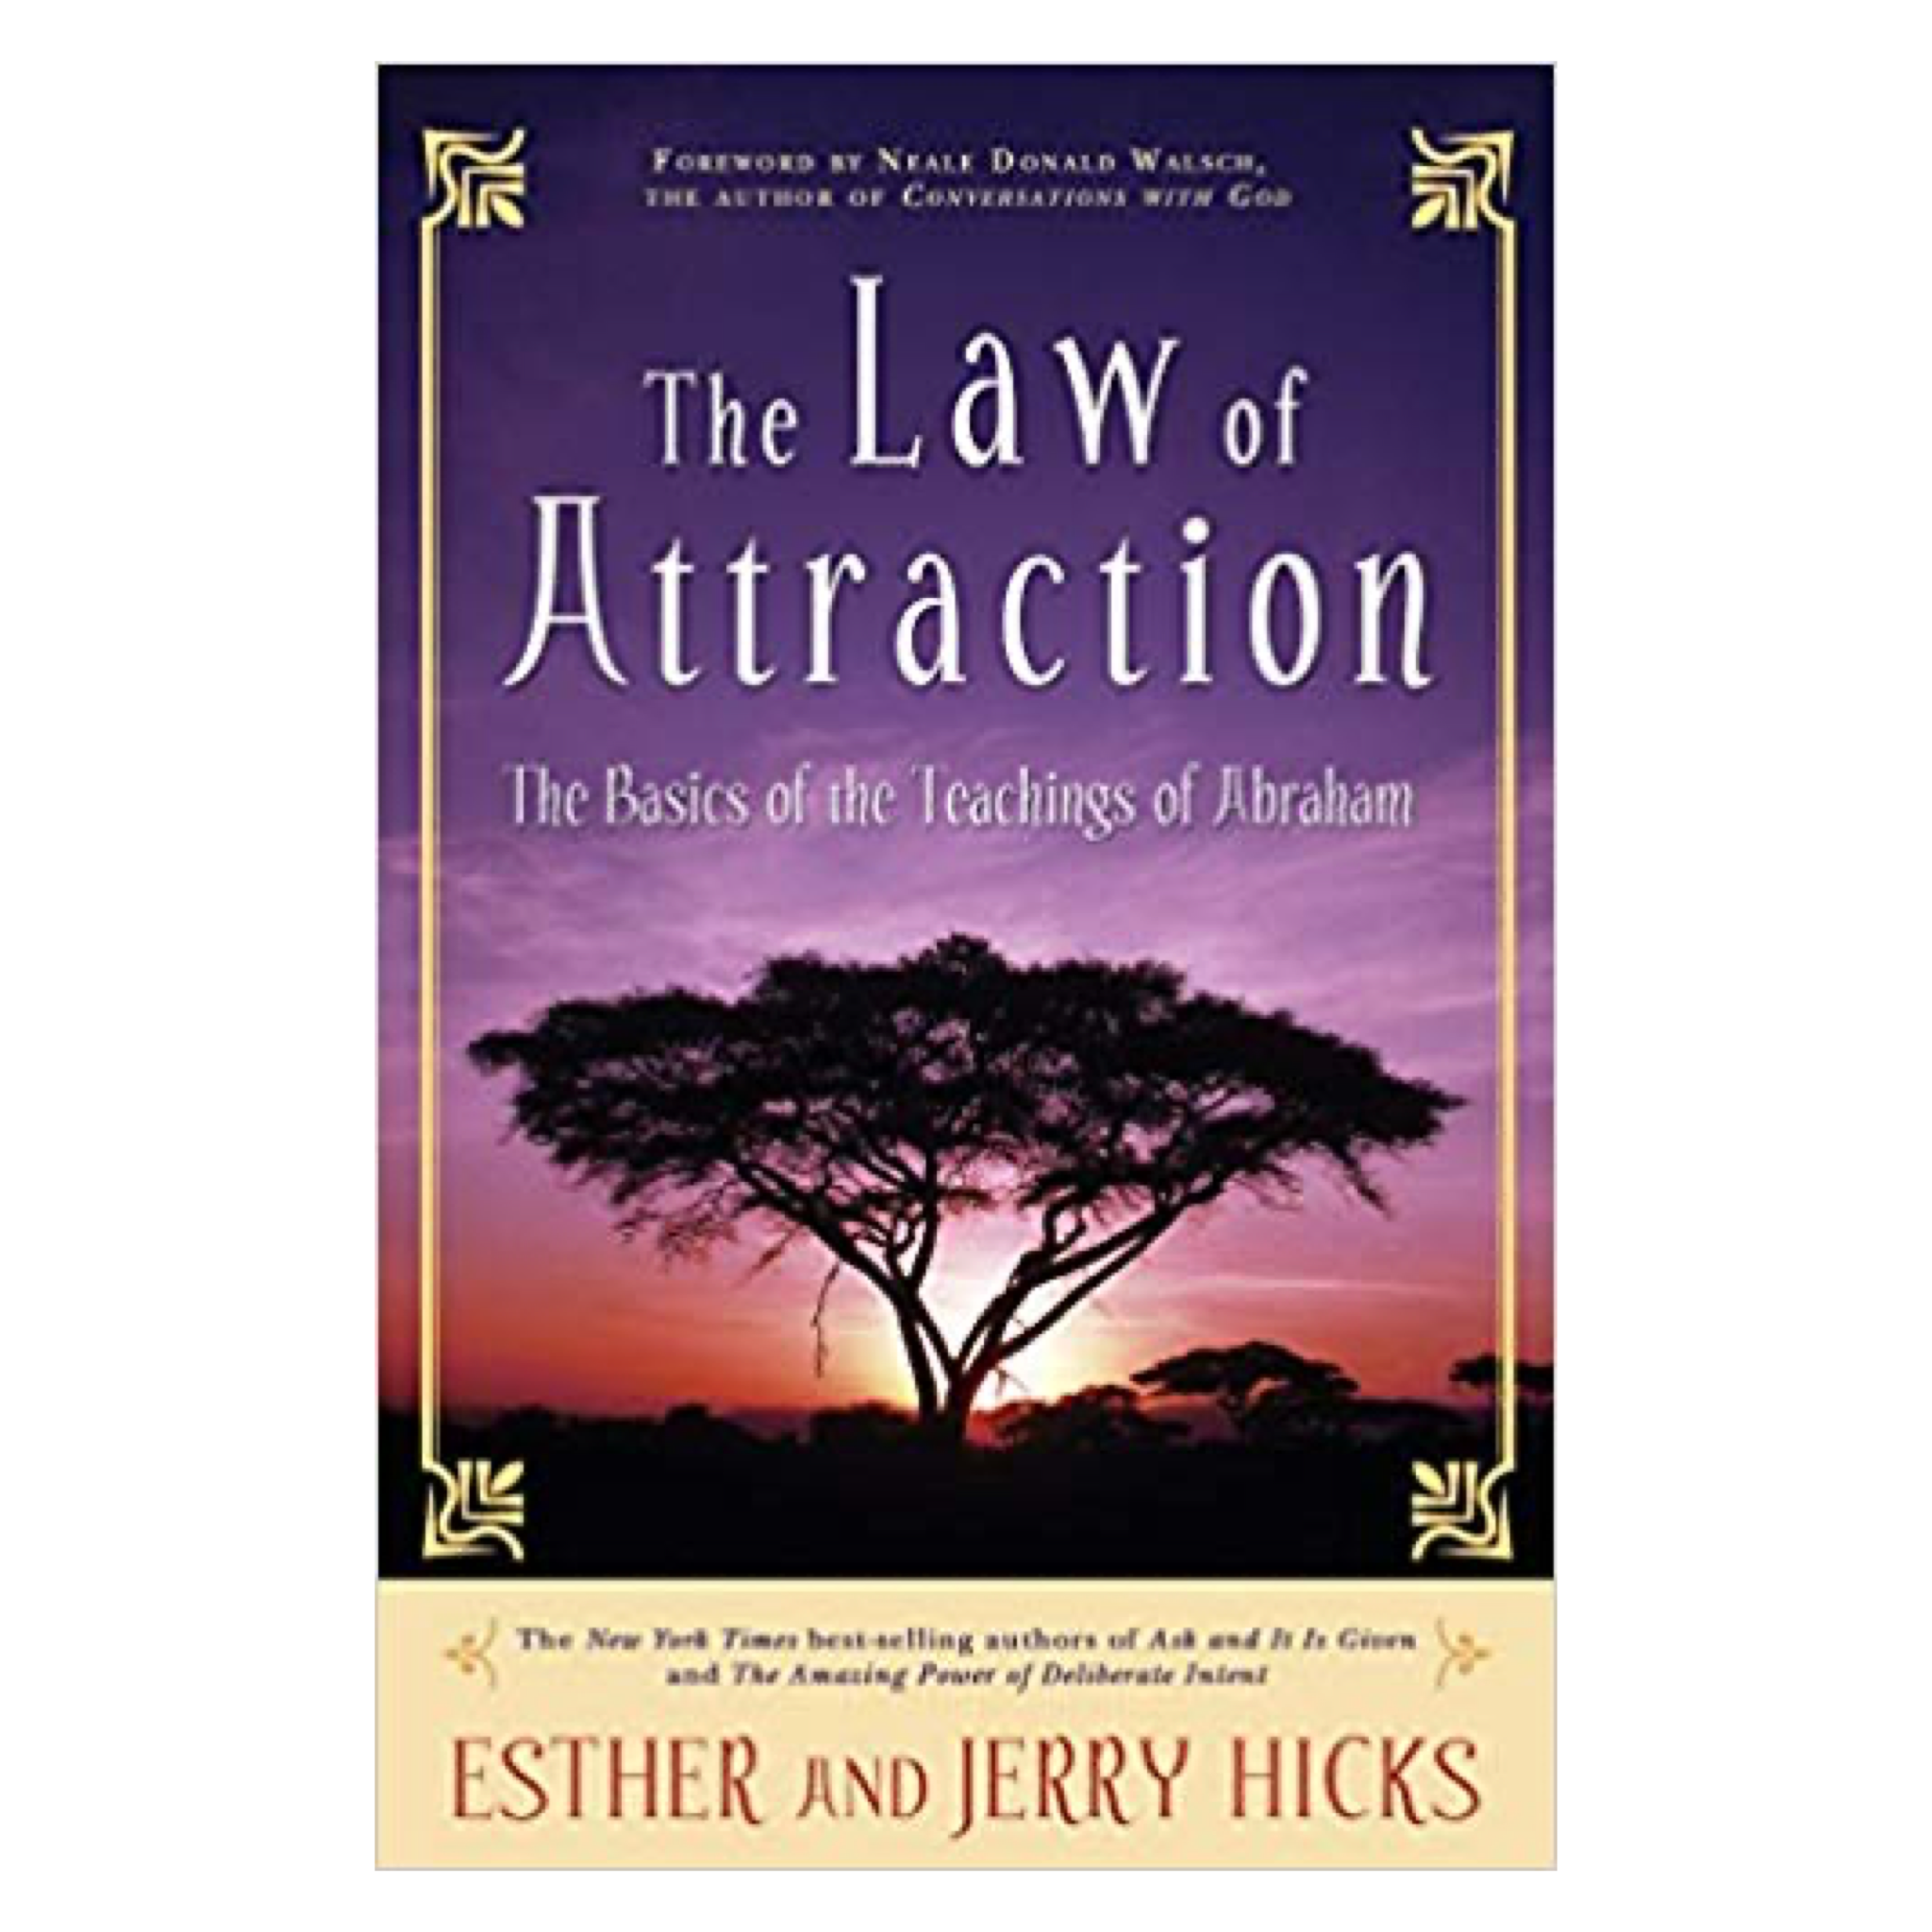 Law of Attraction by Esther and Jerry Hicks